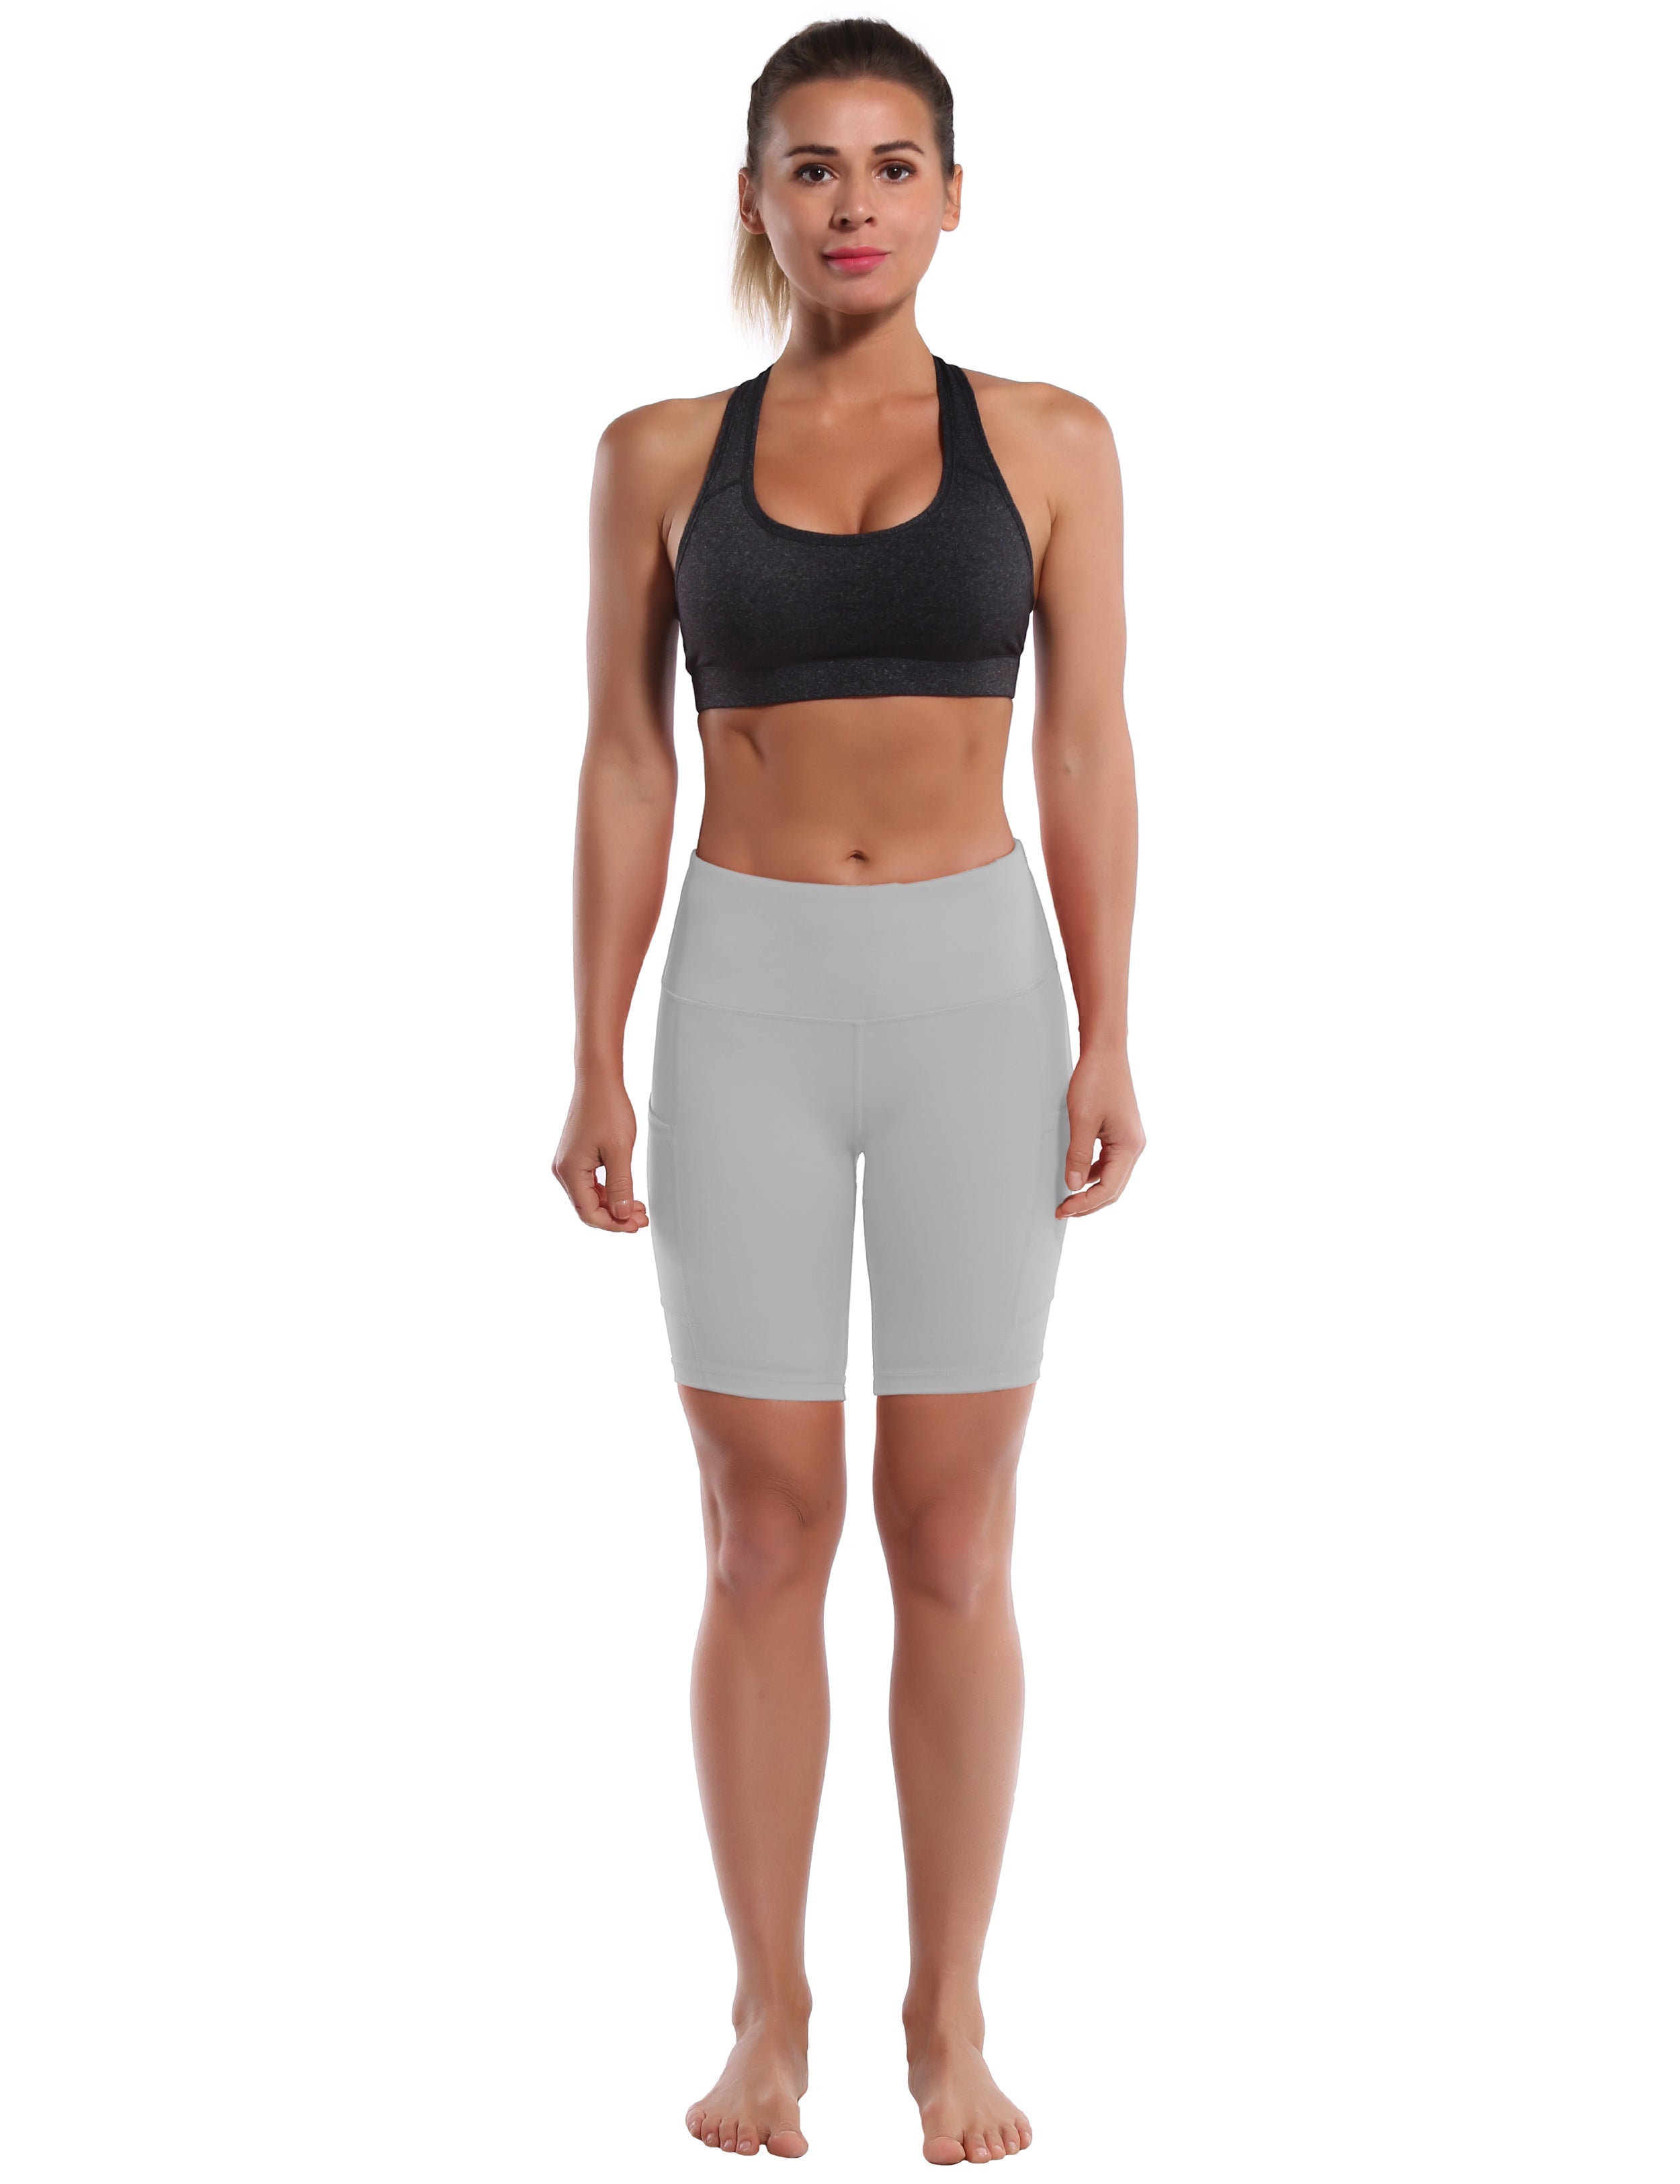 8" Side Pockets yogastudio Shorts lightgray Sleek, soft, smooth and totally comfortable: our newest style is here. Softest-ever fabric High elasticity High density 4-way stretch Fabric doesn't attract lint easily No see-through Moisture-wicking Machine wash 75% Nylon, 25% Spandex